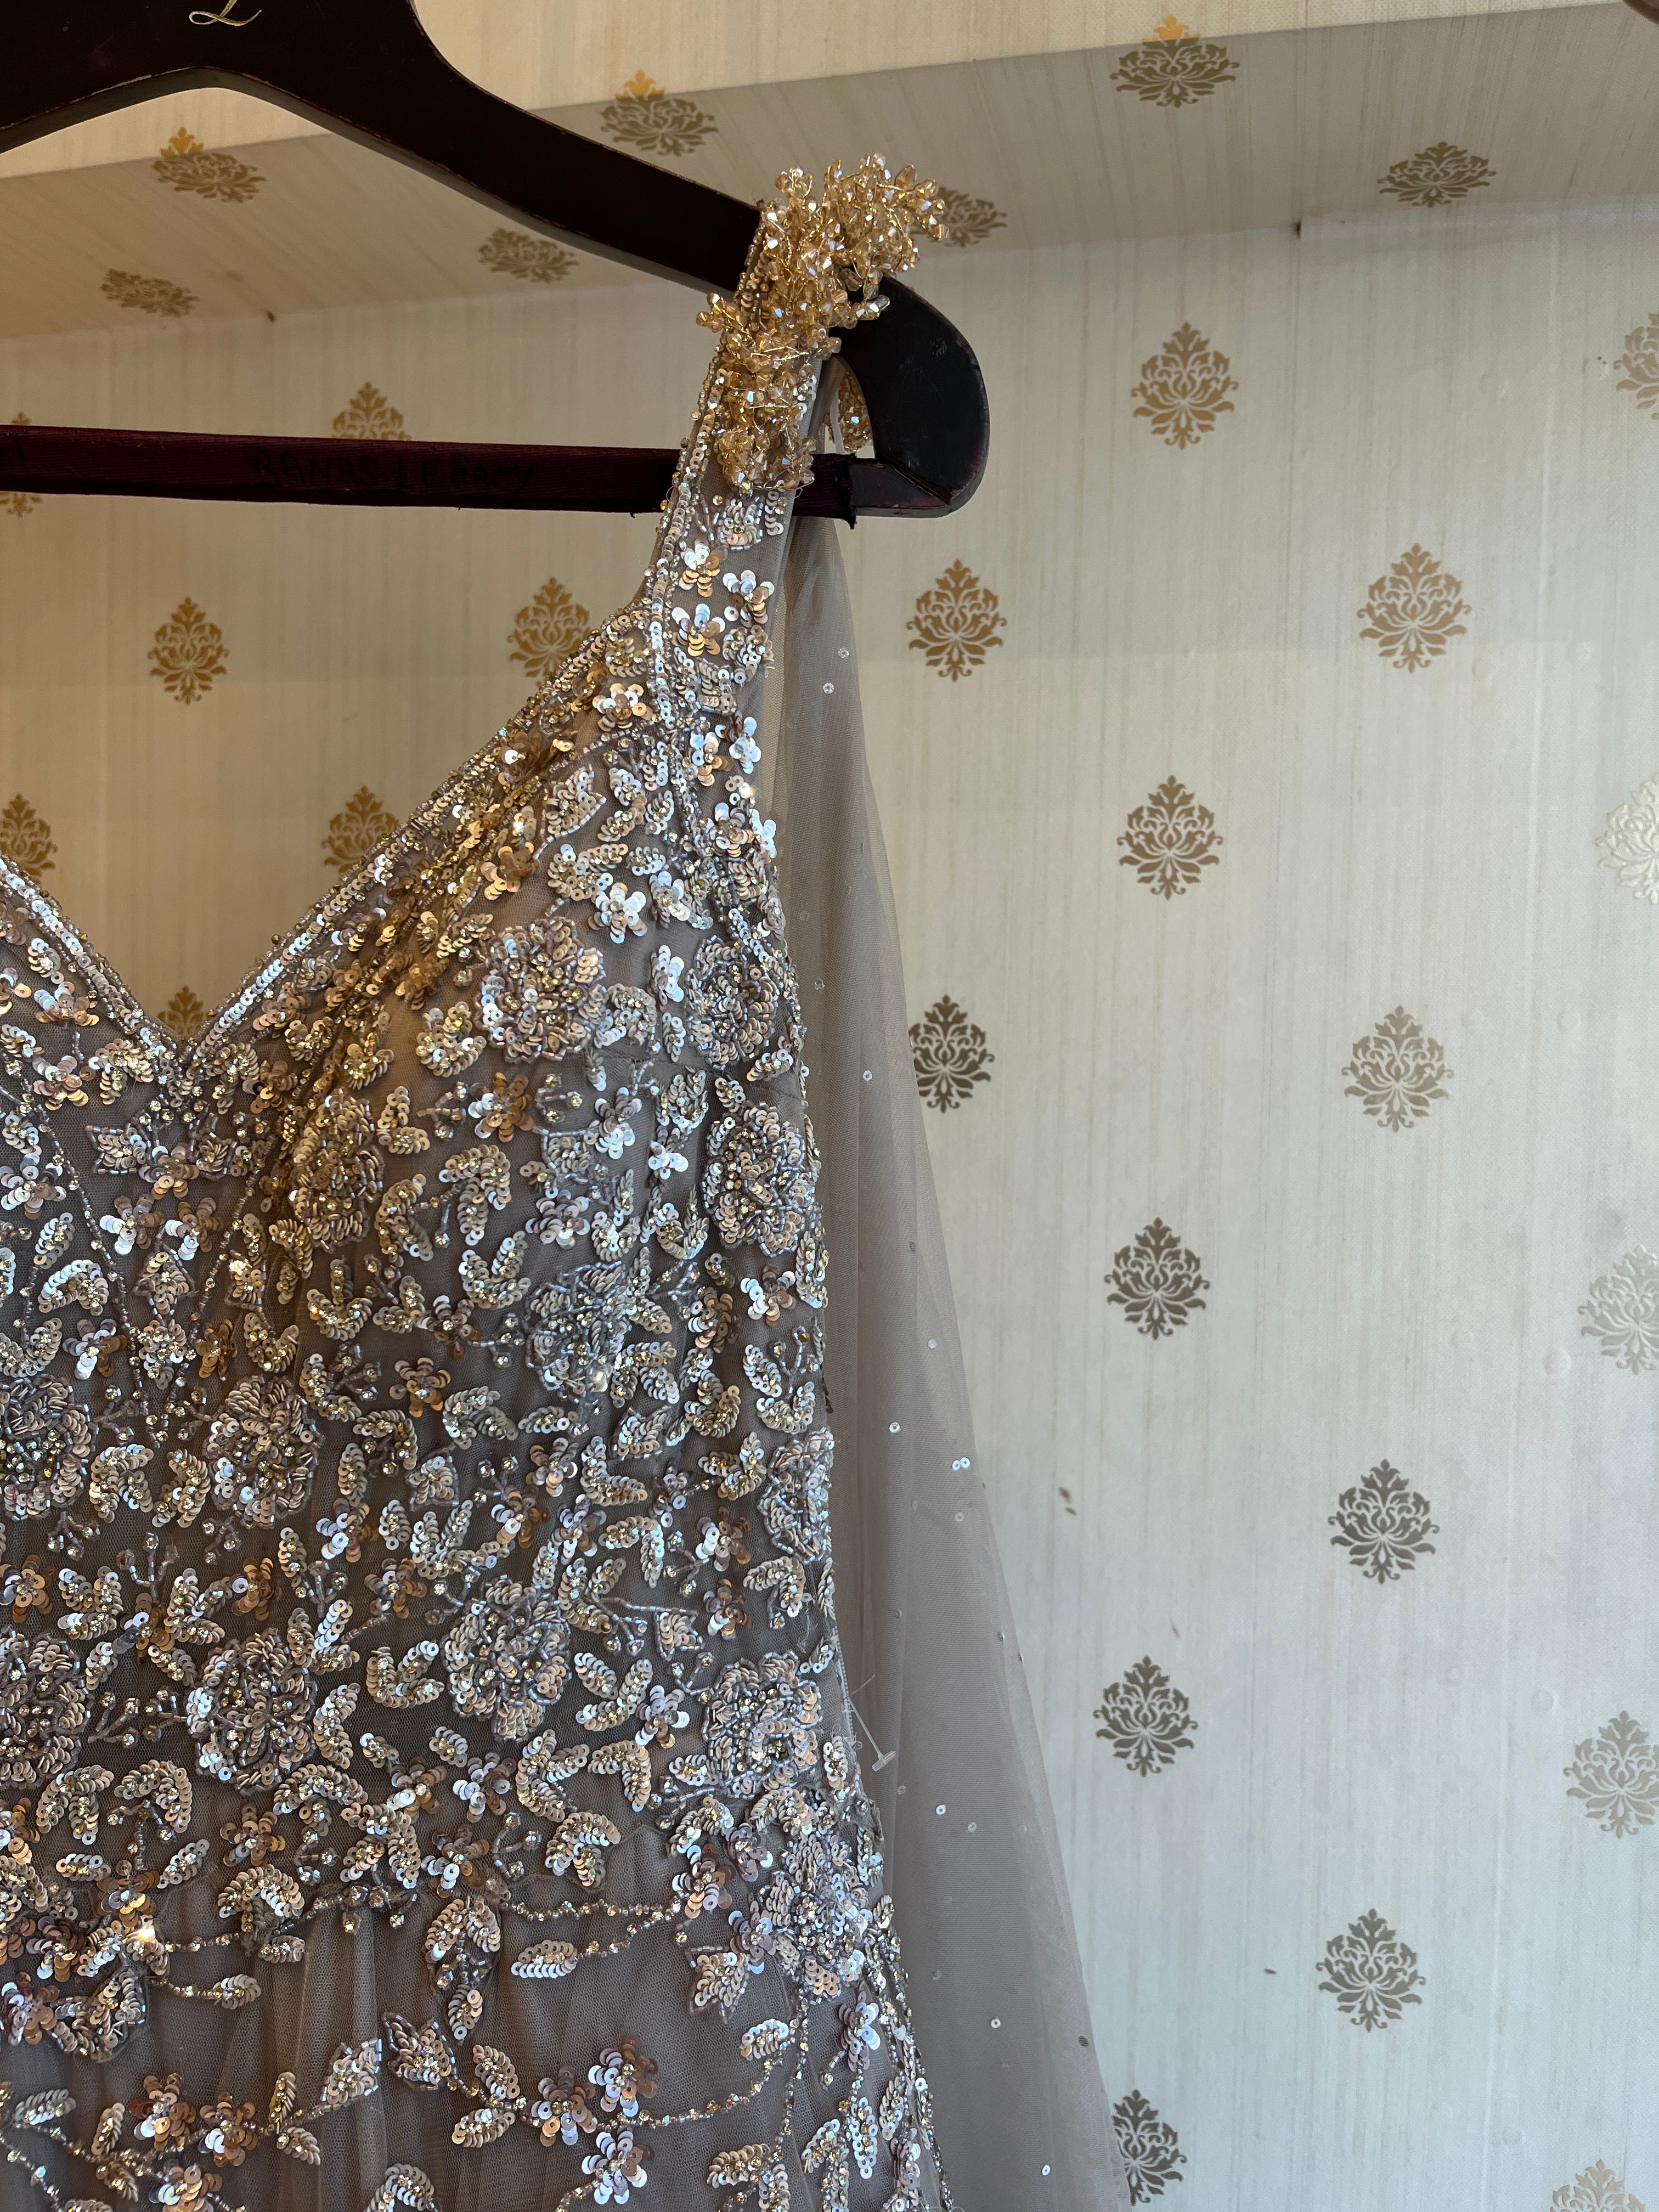 Champagne Sequin gown